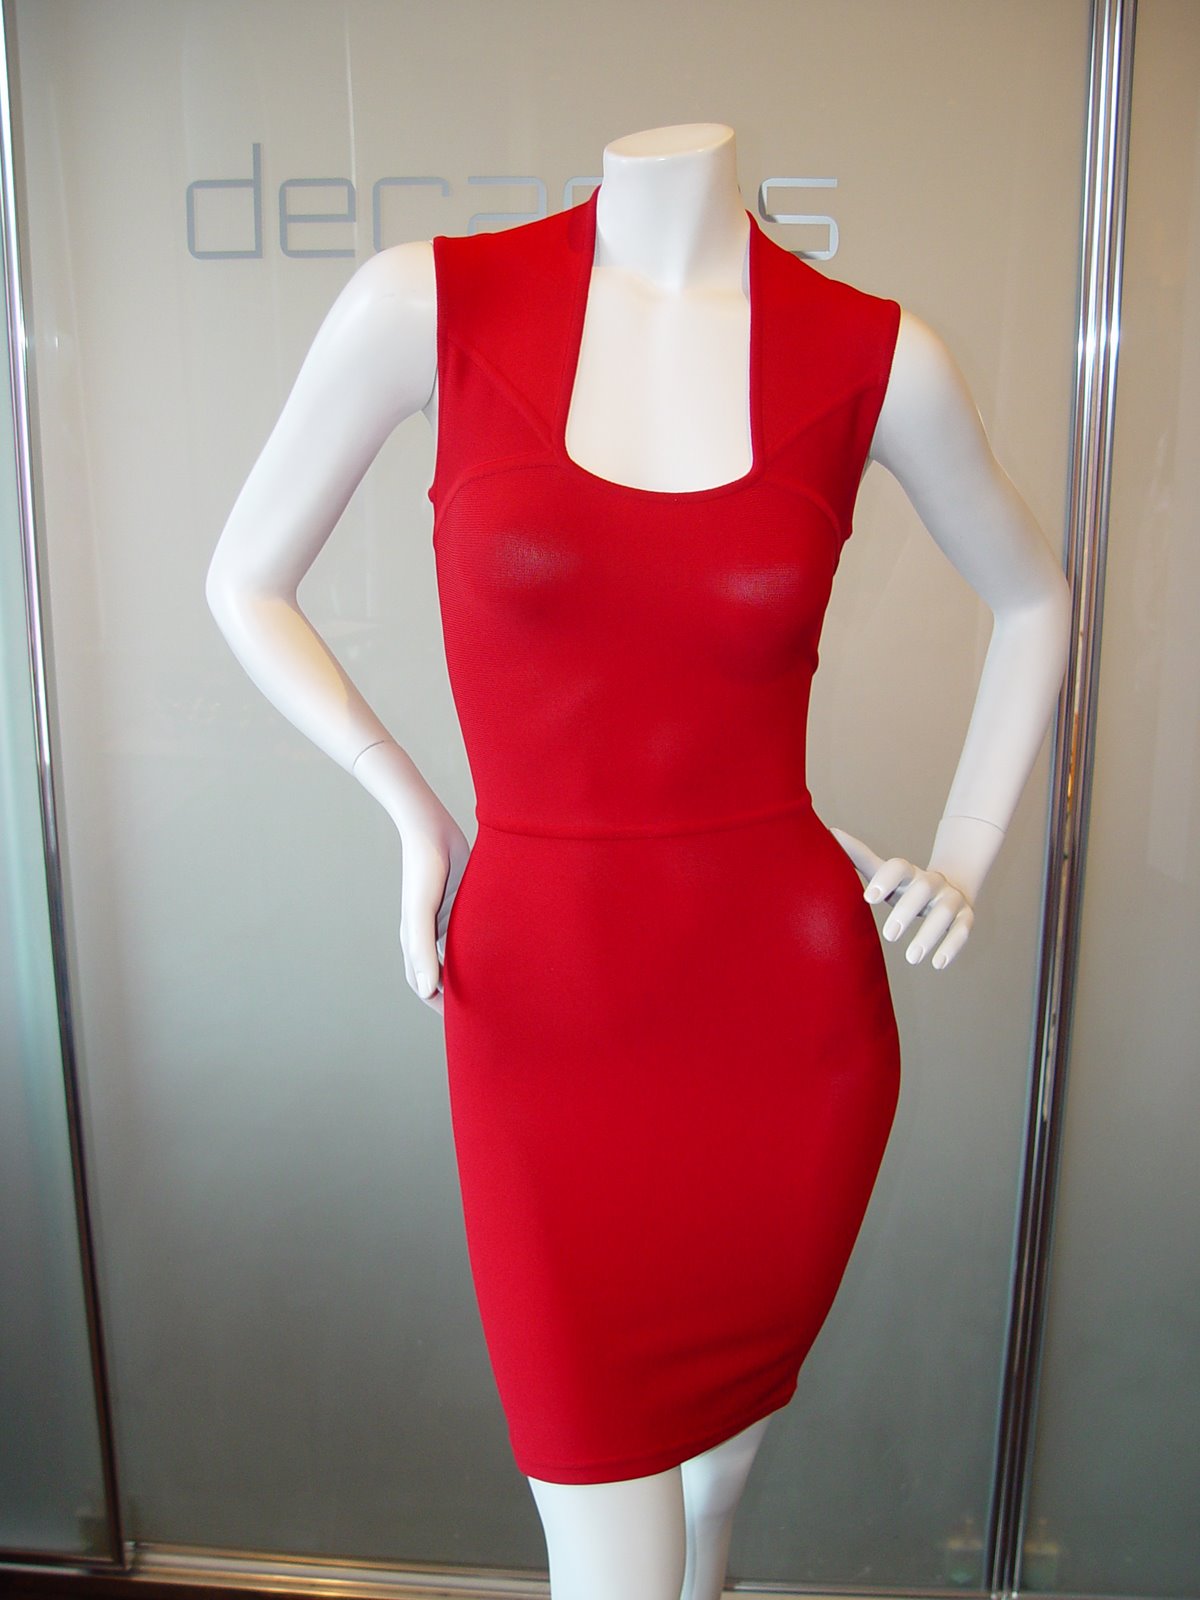 [HERVE+LEGER+EARLY+90S+RED+STRETCH+MINI+DRESSES+WITH+SQUARE+NECK+SANS+LABEL.JPG.JPG]